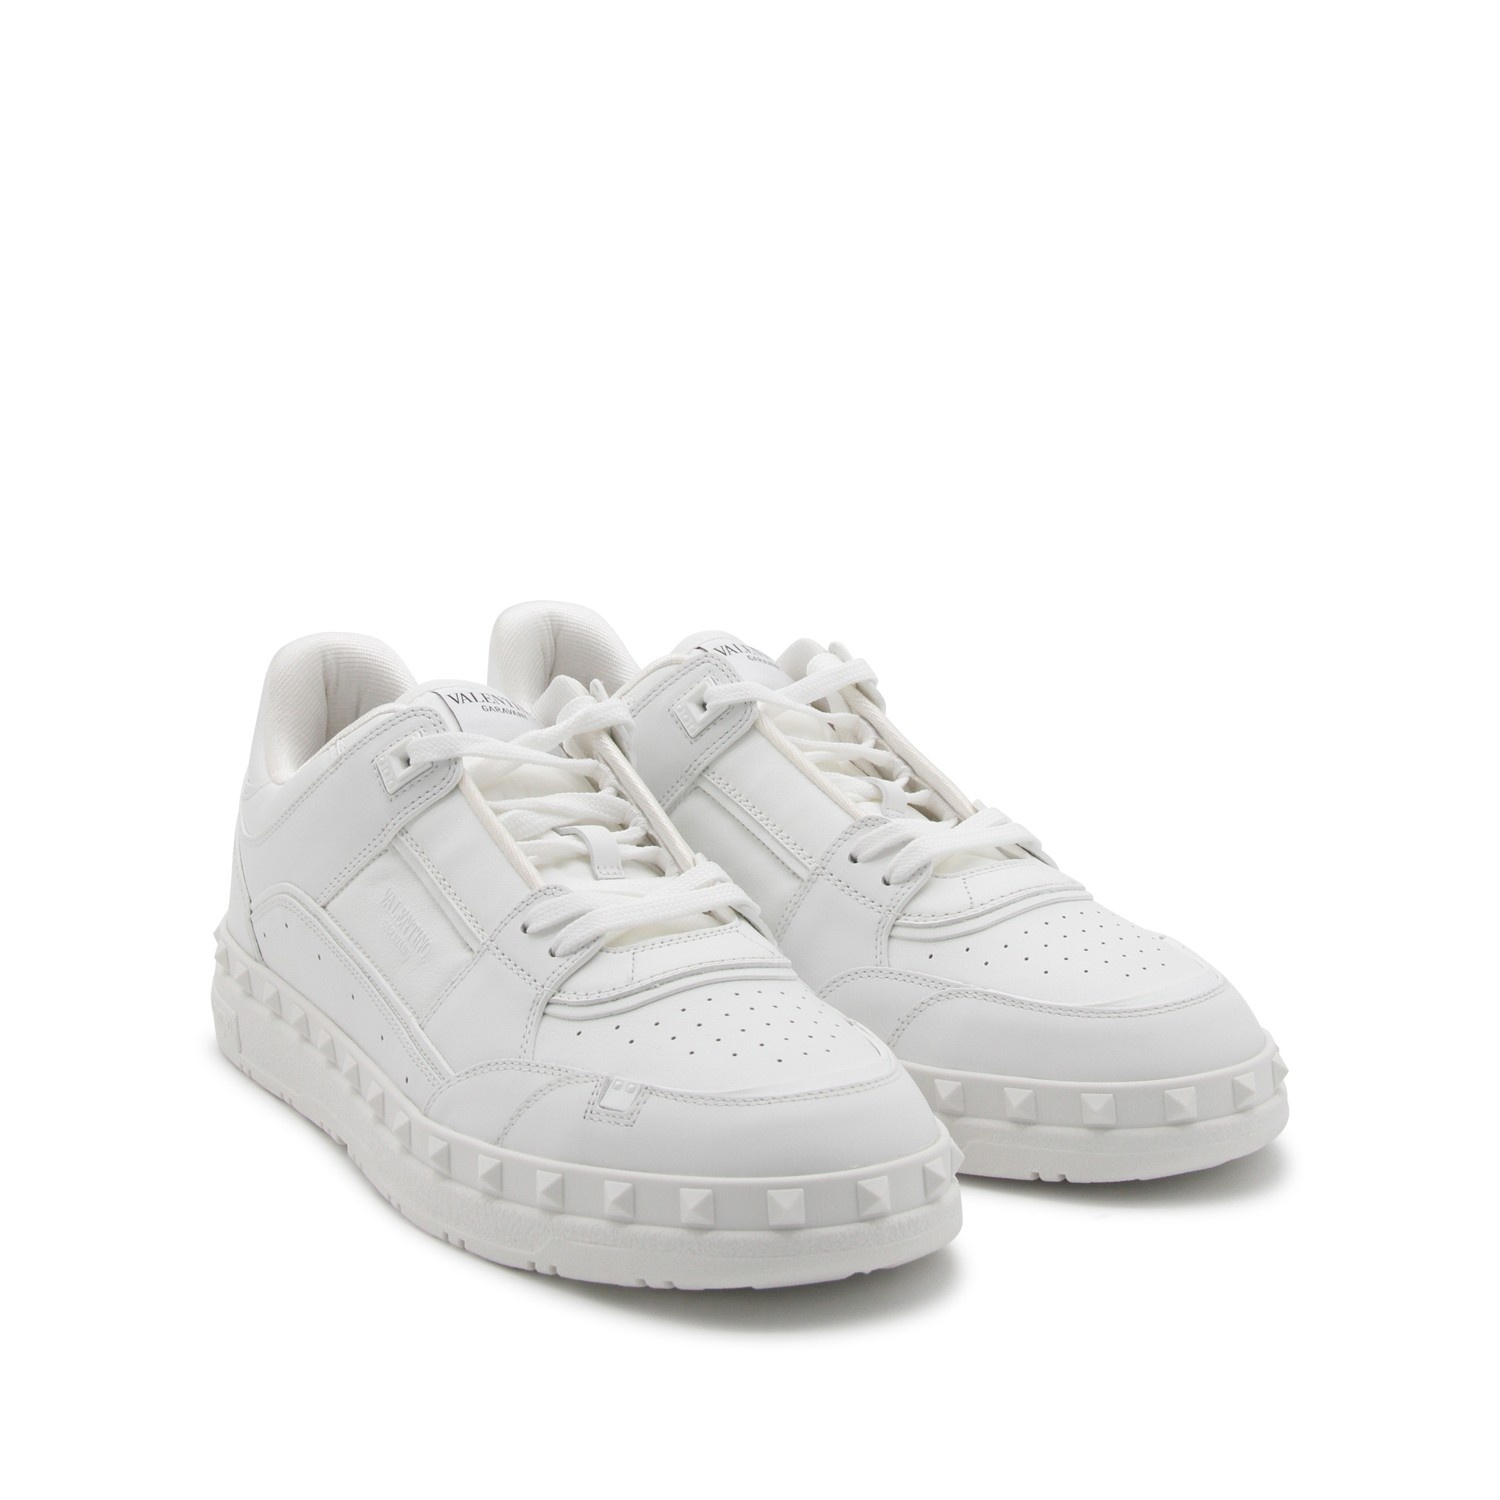 WHITE LEATHER FREEDOTS SNEAKERS - 2